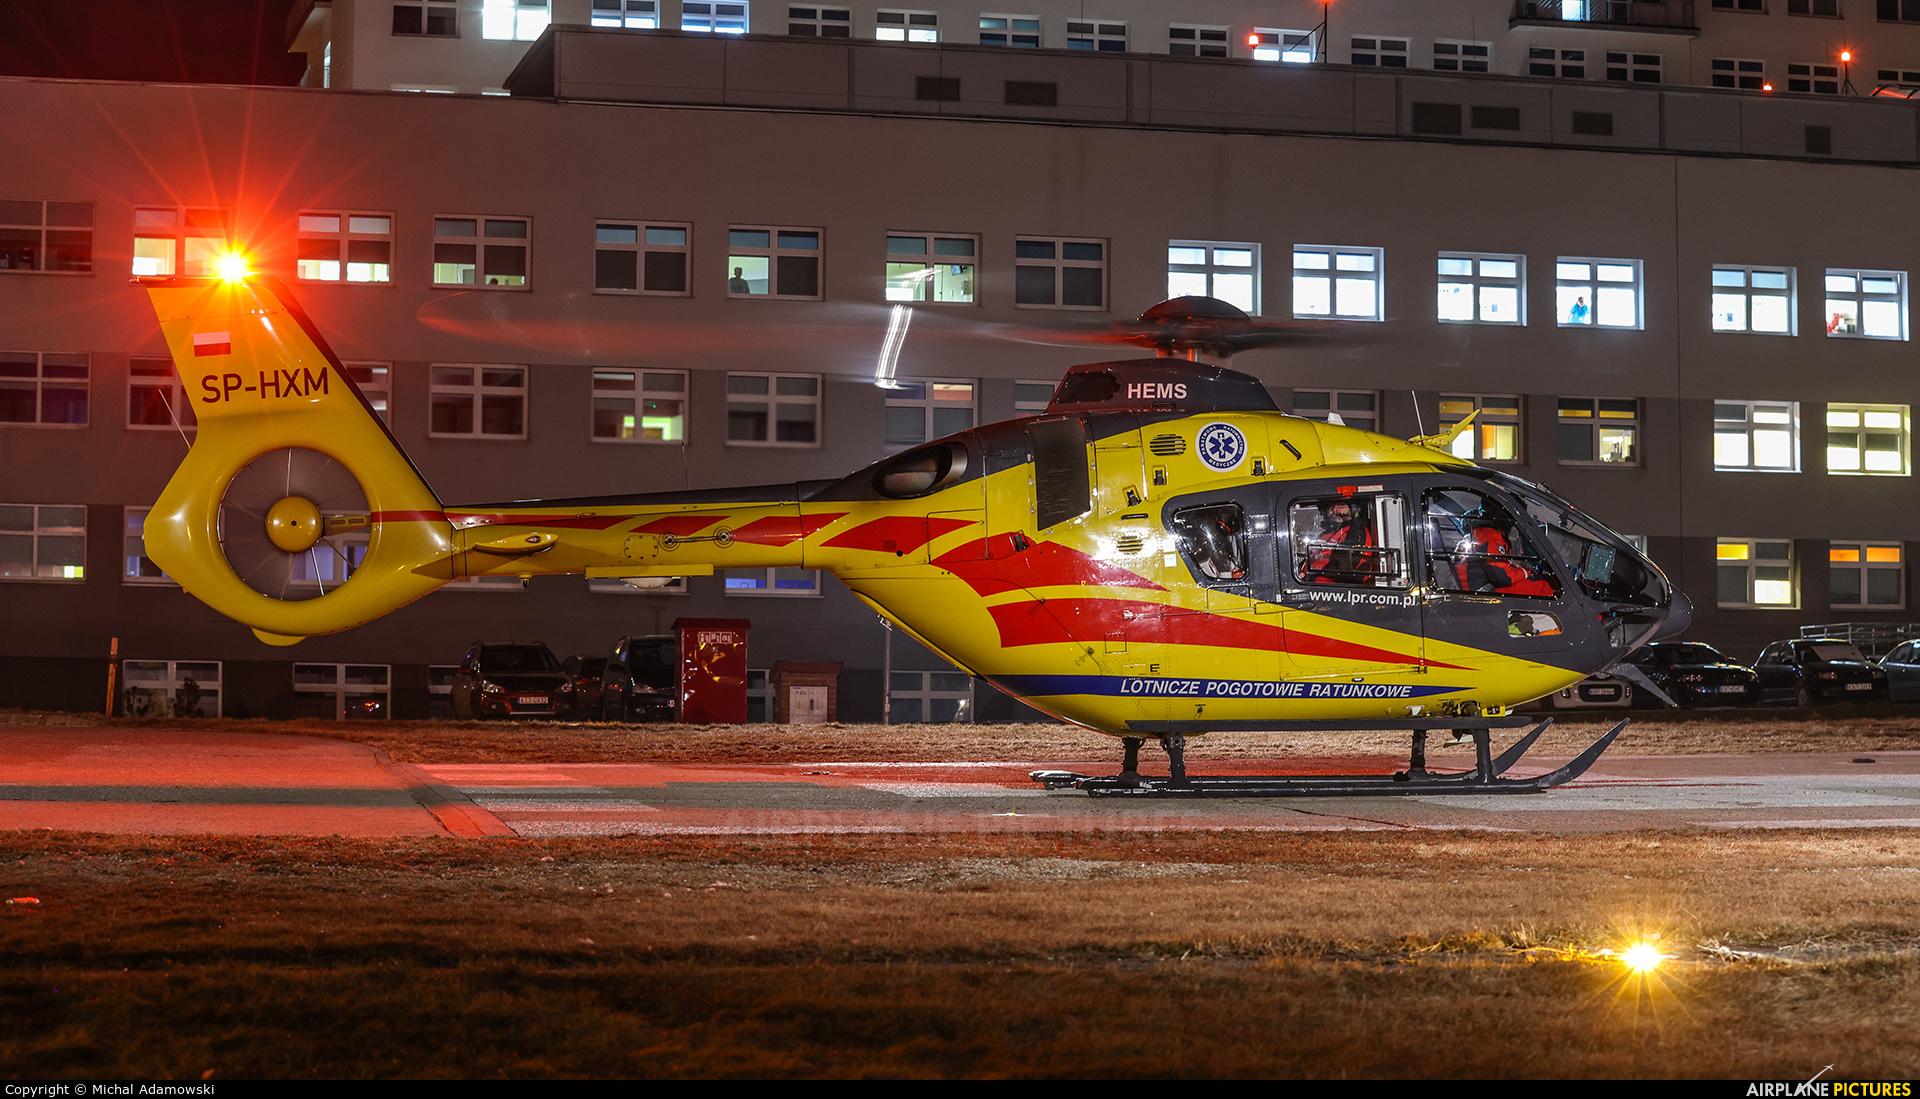 Polish Medical Air Rescue - Lotnicze Pogotowie Ratunkowe SP-HXM aircraft at 